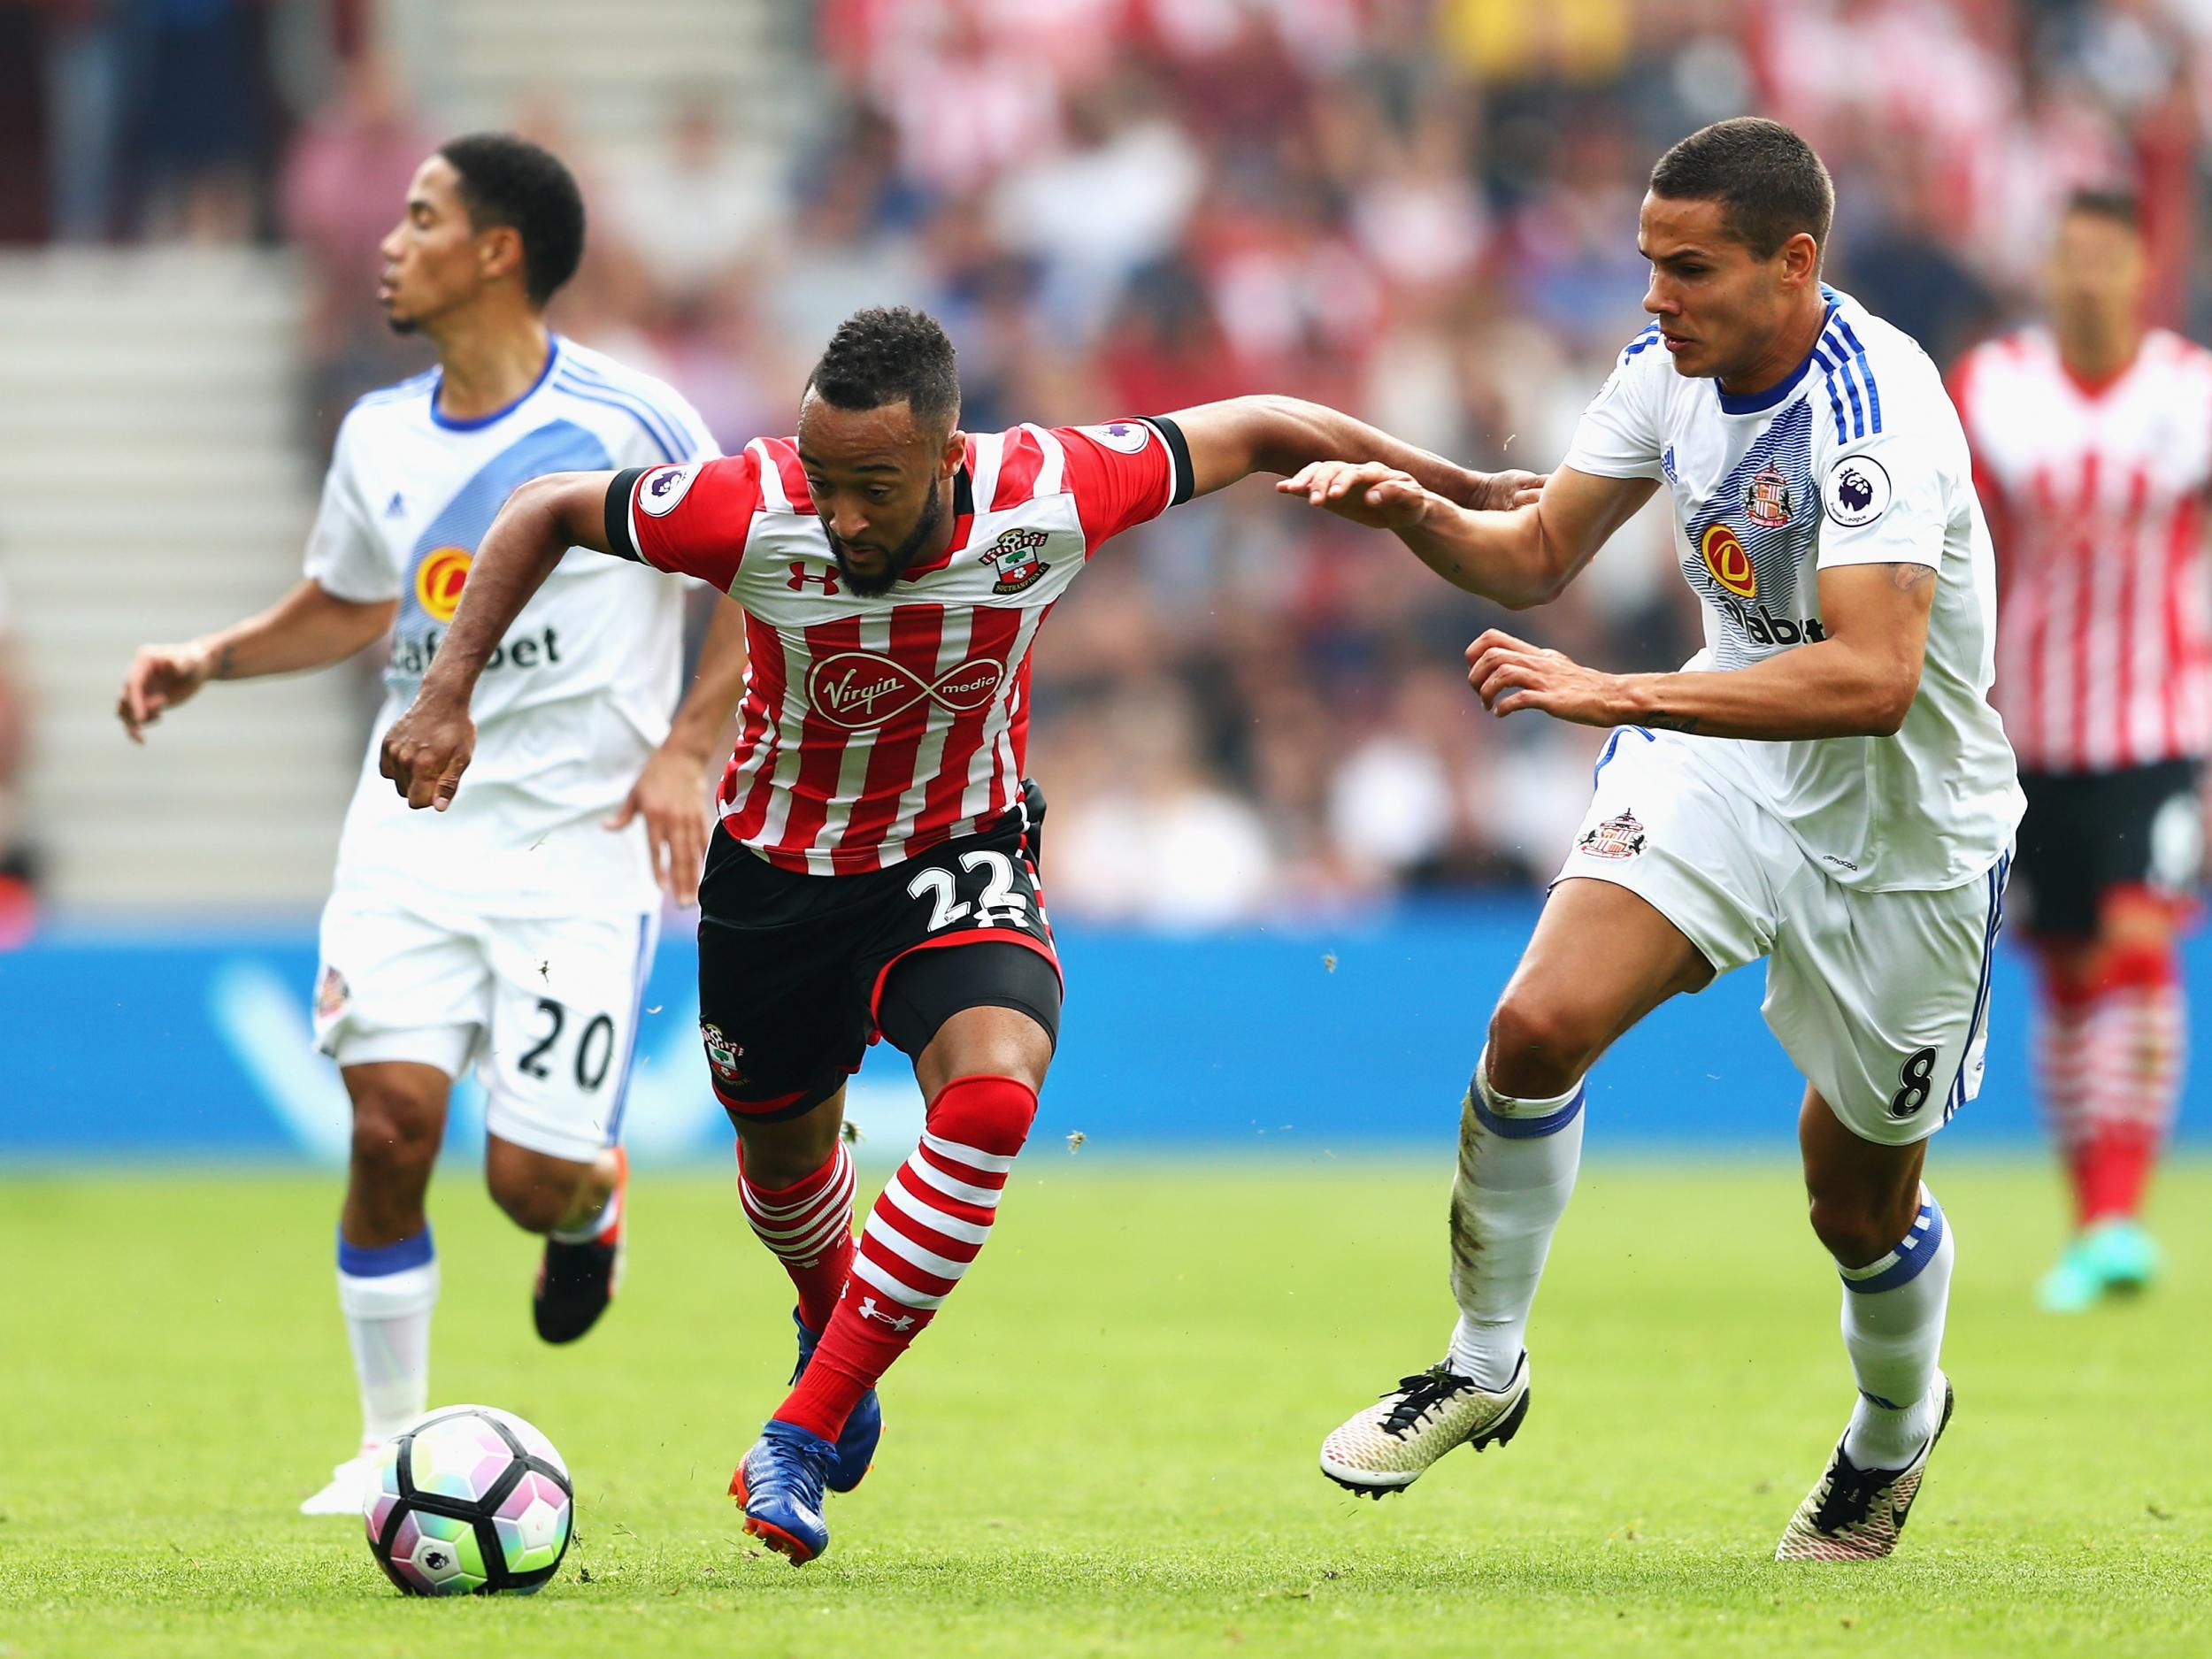 Sunderland will hope to continue their recent good form with a win against Southampton